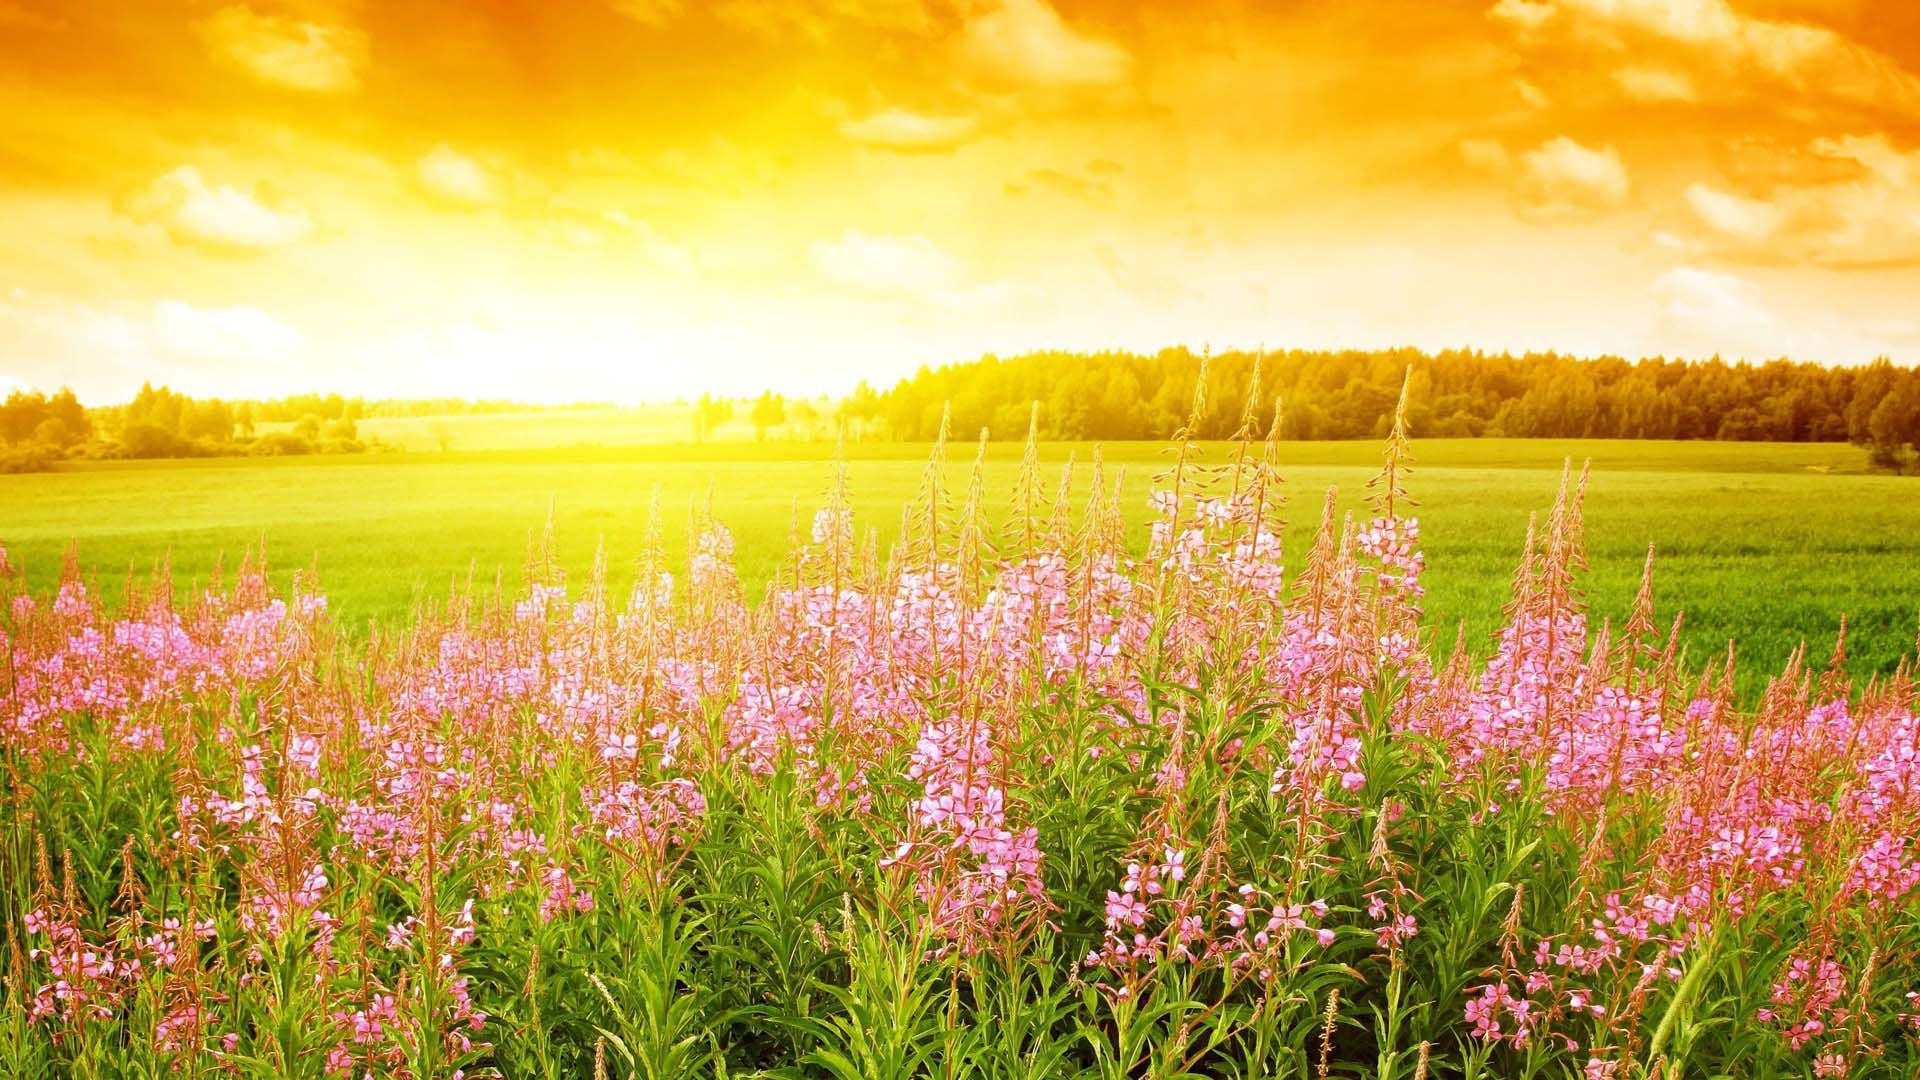 Sunrise In The Field With Wild Flowers. HD Nature Wallpaper for Mobile and Desktop